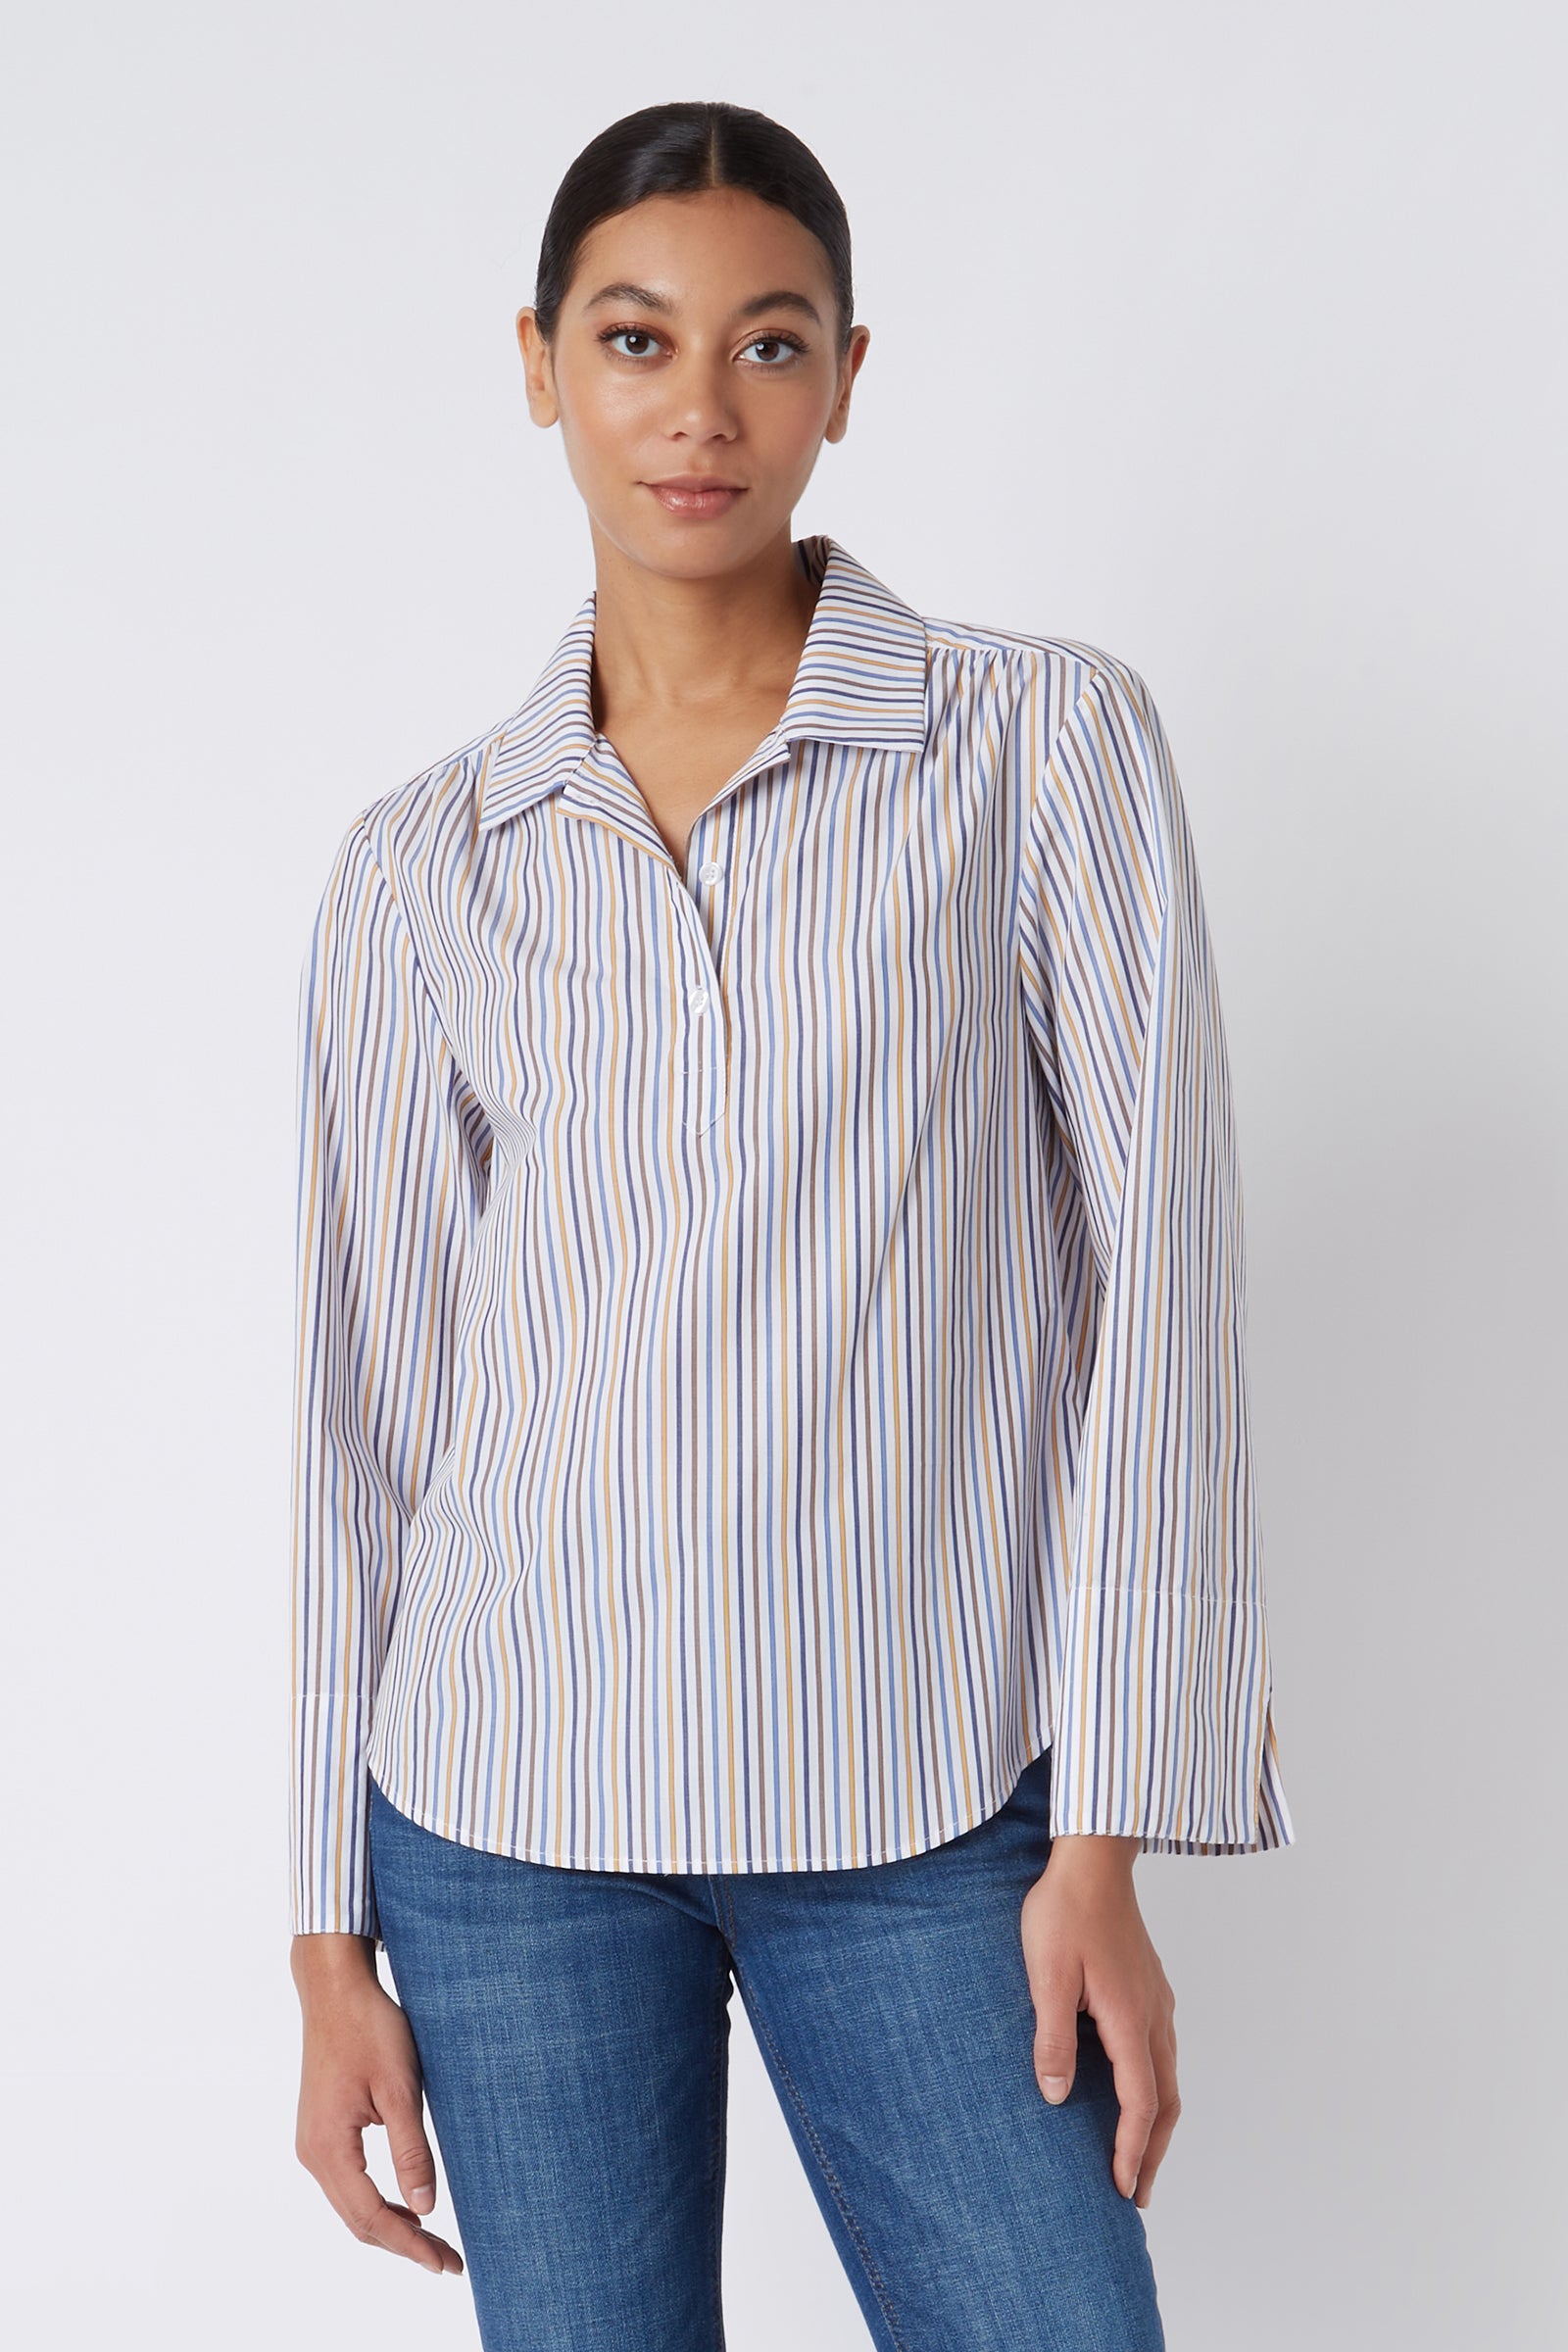 Kal Rieman Edie Collared Placket Shirt in Multi Stripe Gold on Model Cropped Front View